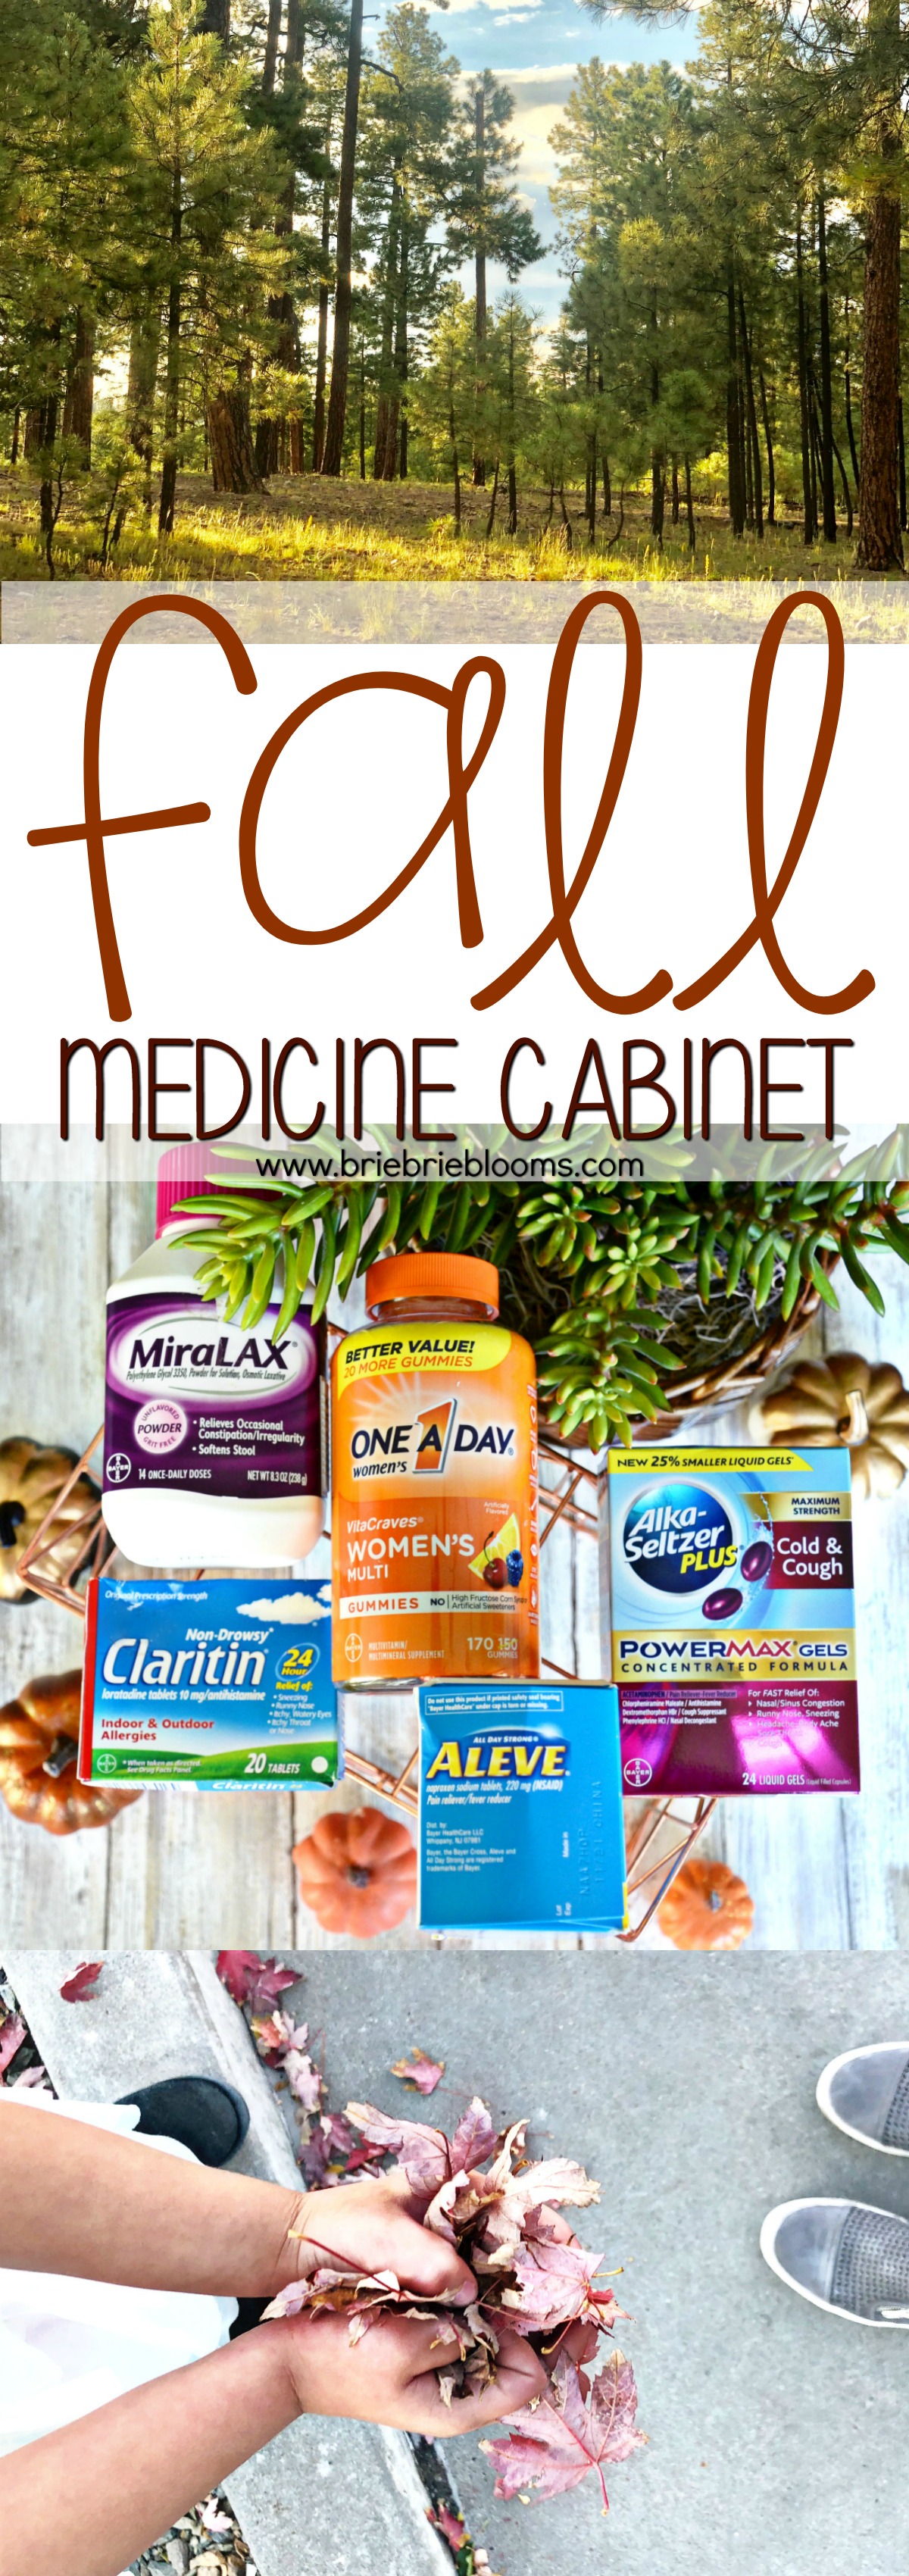 Our fall medicine cabinet has us ready for a busy holiday season. This week, we refreshed our medicine cabinet with Aleve®, Alka-Seltzer Plus®, Claritin®, MiraLAX®, and One A Day® Vitamins from Amazon.